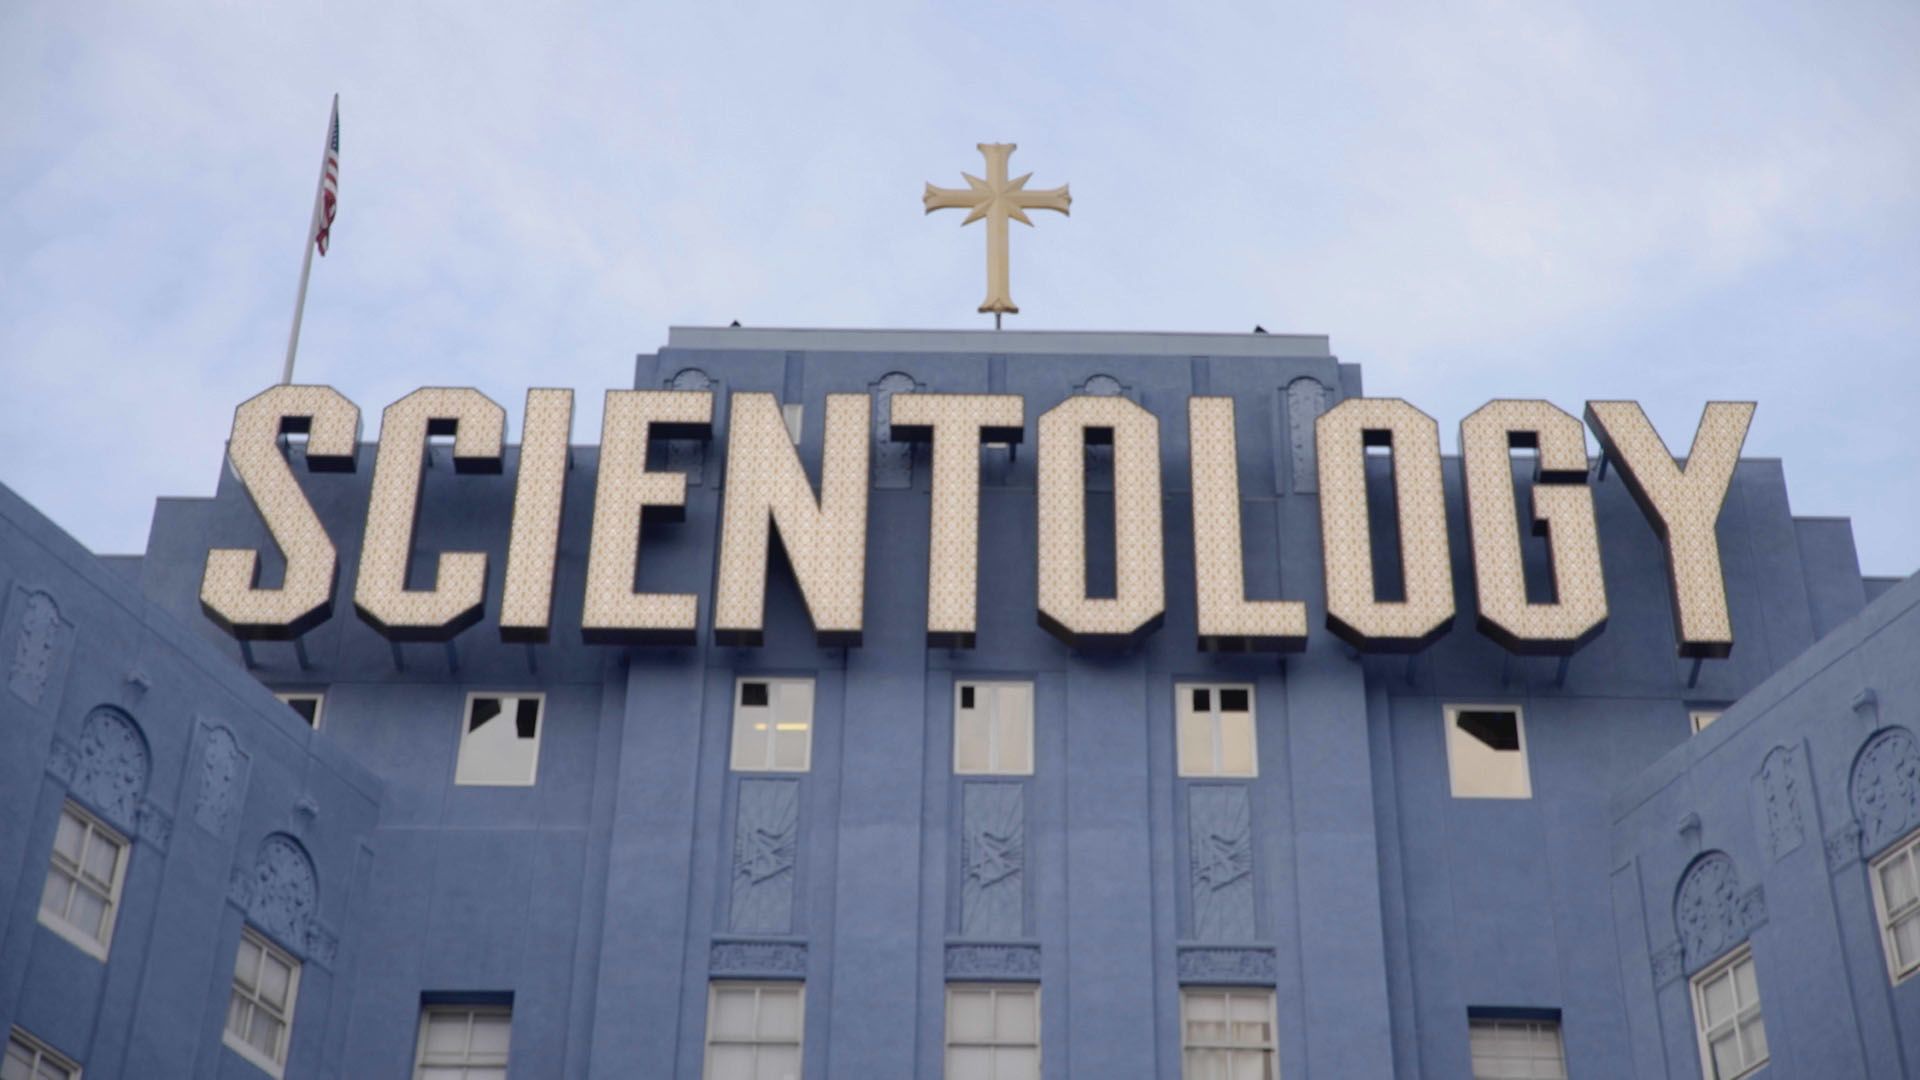 Future of Scientology in Society